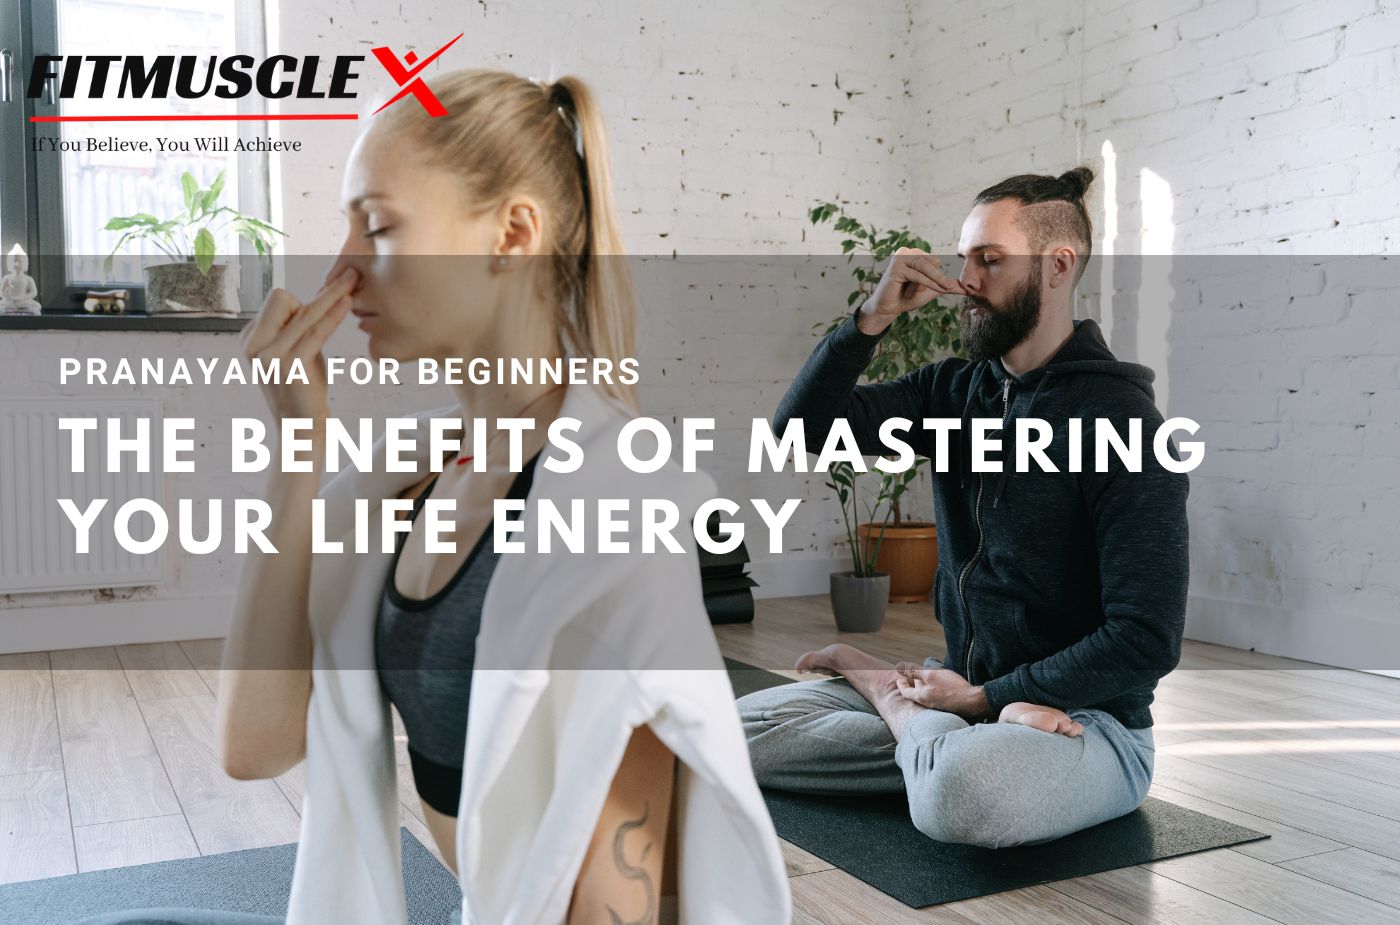 the Benefits of Mastering Your Life Energy